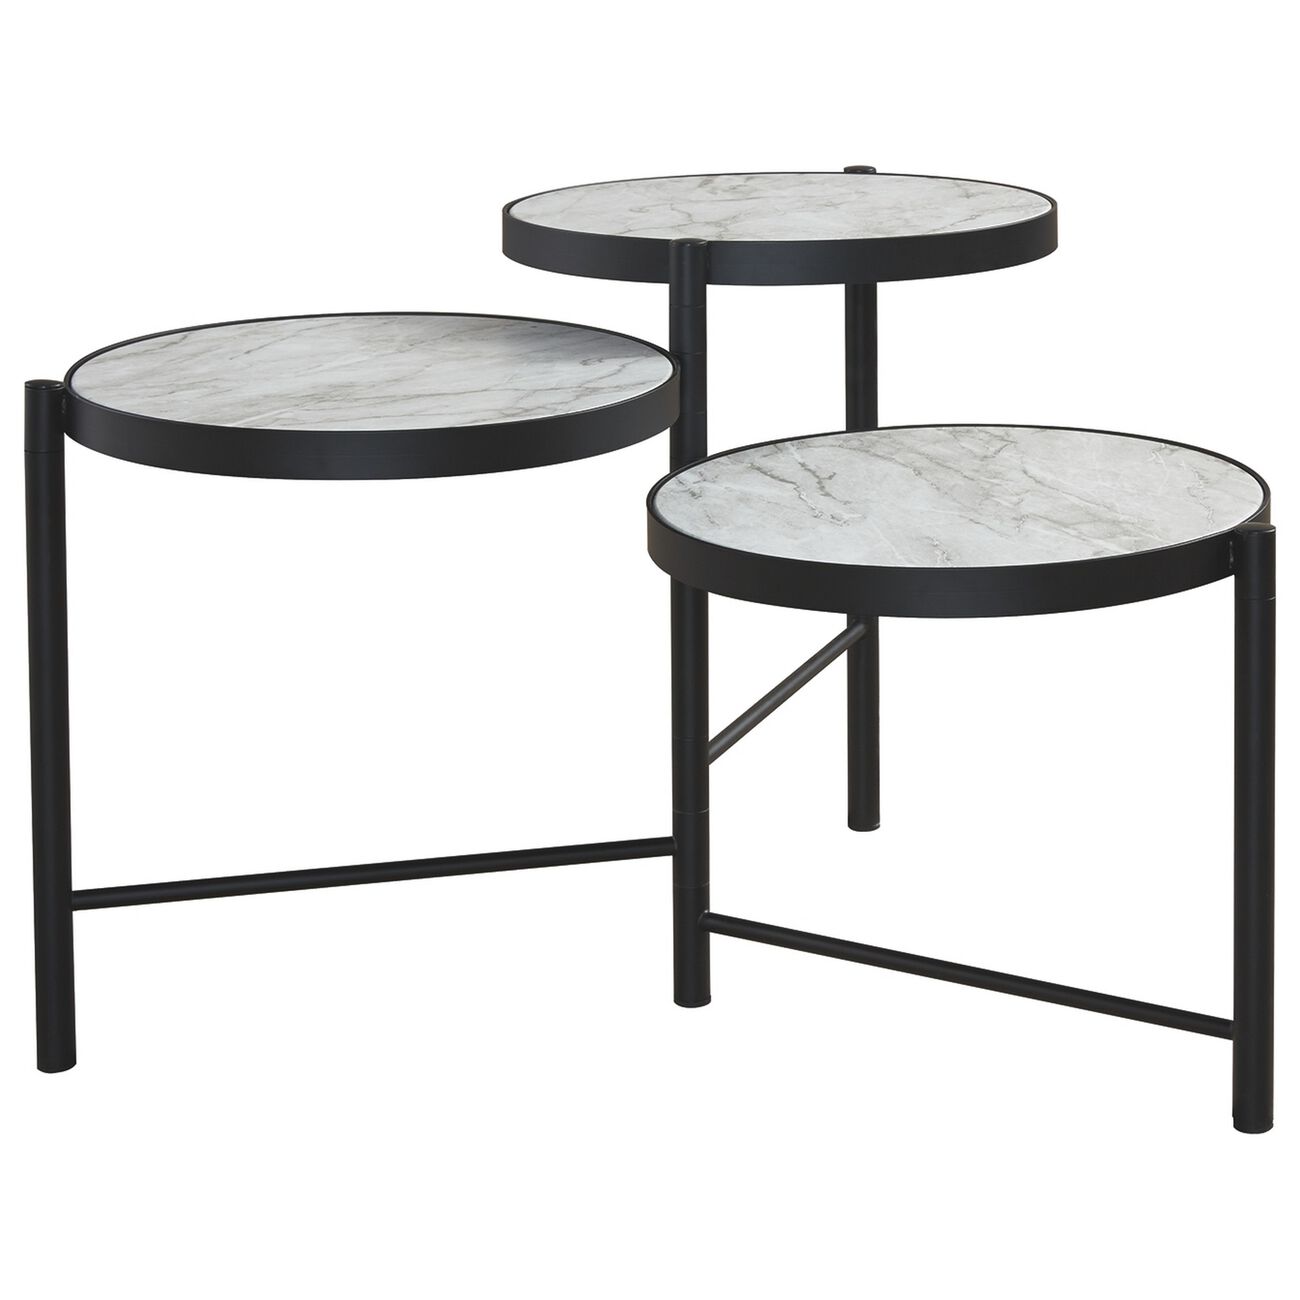 Round 3 Tier Metal Cocktail Table with Marble Top, White and Black